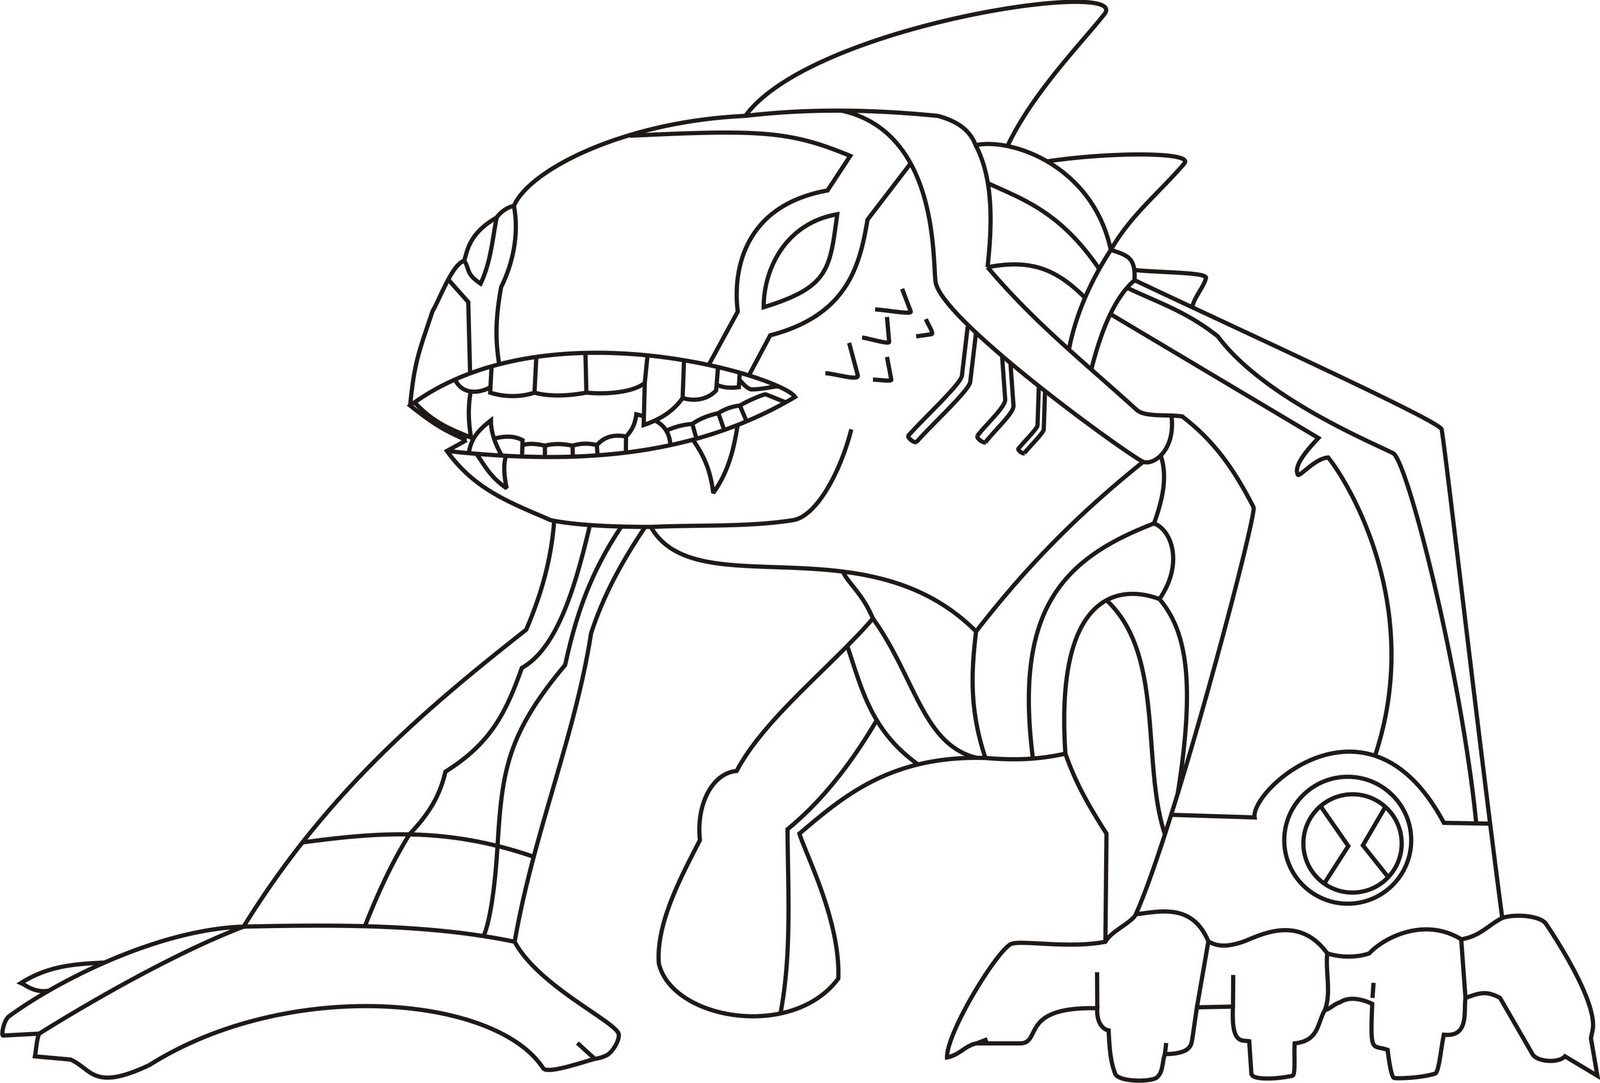 Free ben 10 with omnitrix from ben 10 coloring page online. 